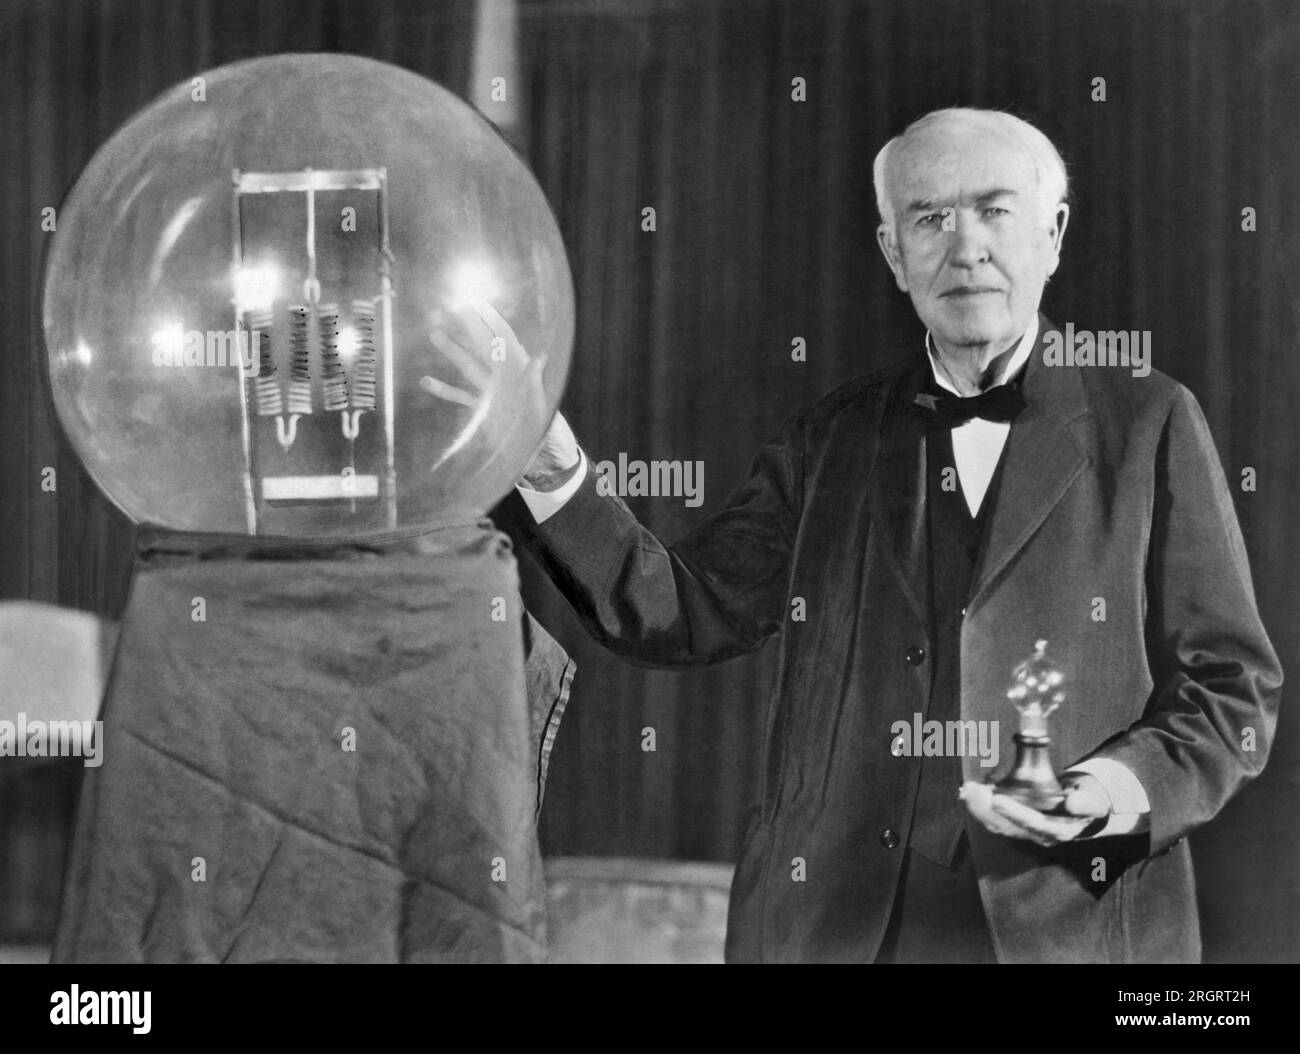 Orange, New Jersey:  October 16, 1929 Noted inventor Thomas Edison at the lightbulb's golden jubilee anniversary banquet in his honor. He is exhibiting in his hand a replica of his first  successful incandescent lamp which gave 16 candlepower of illumination, in contrast to the latest lamp, a 50,000 watt, 150,000 candlepower lamp. Stock Photo